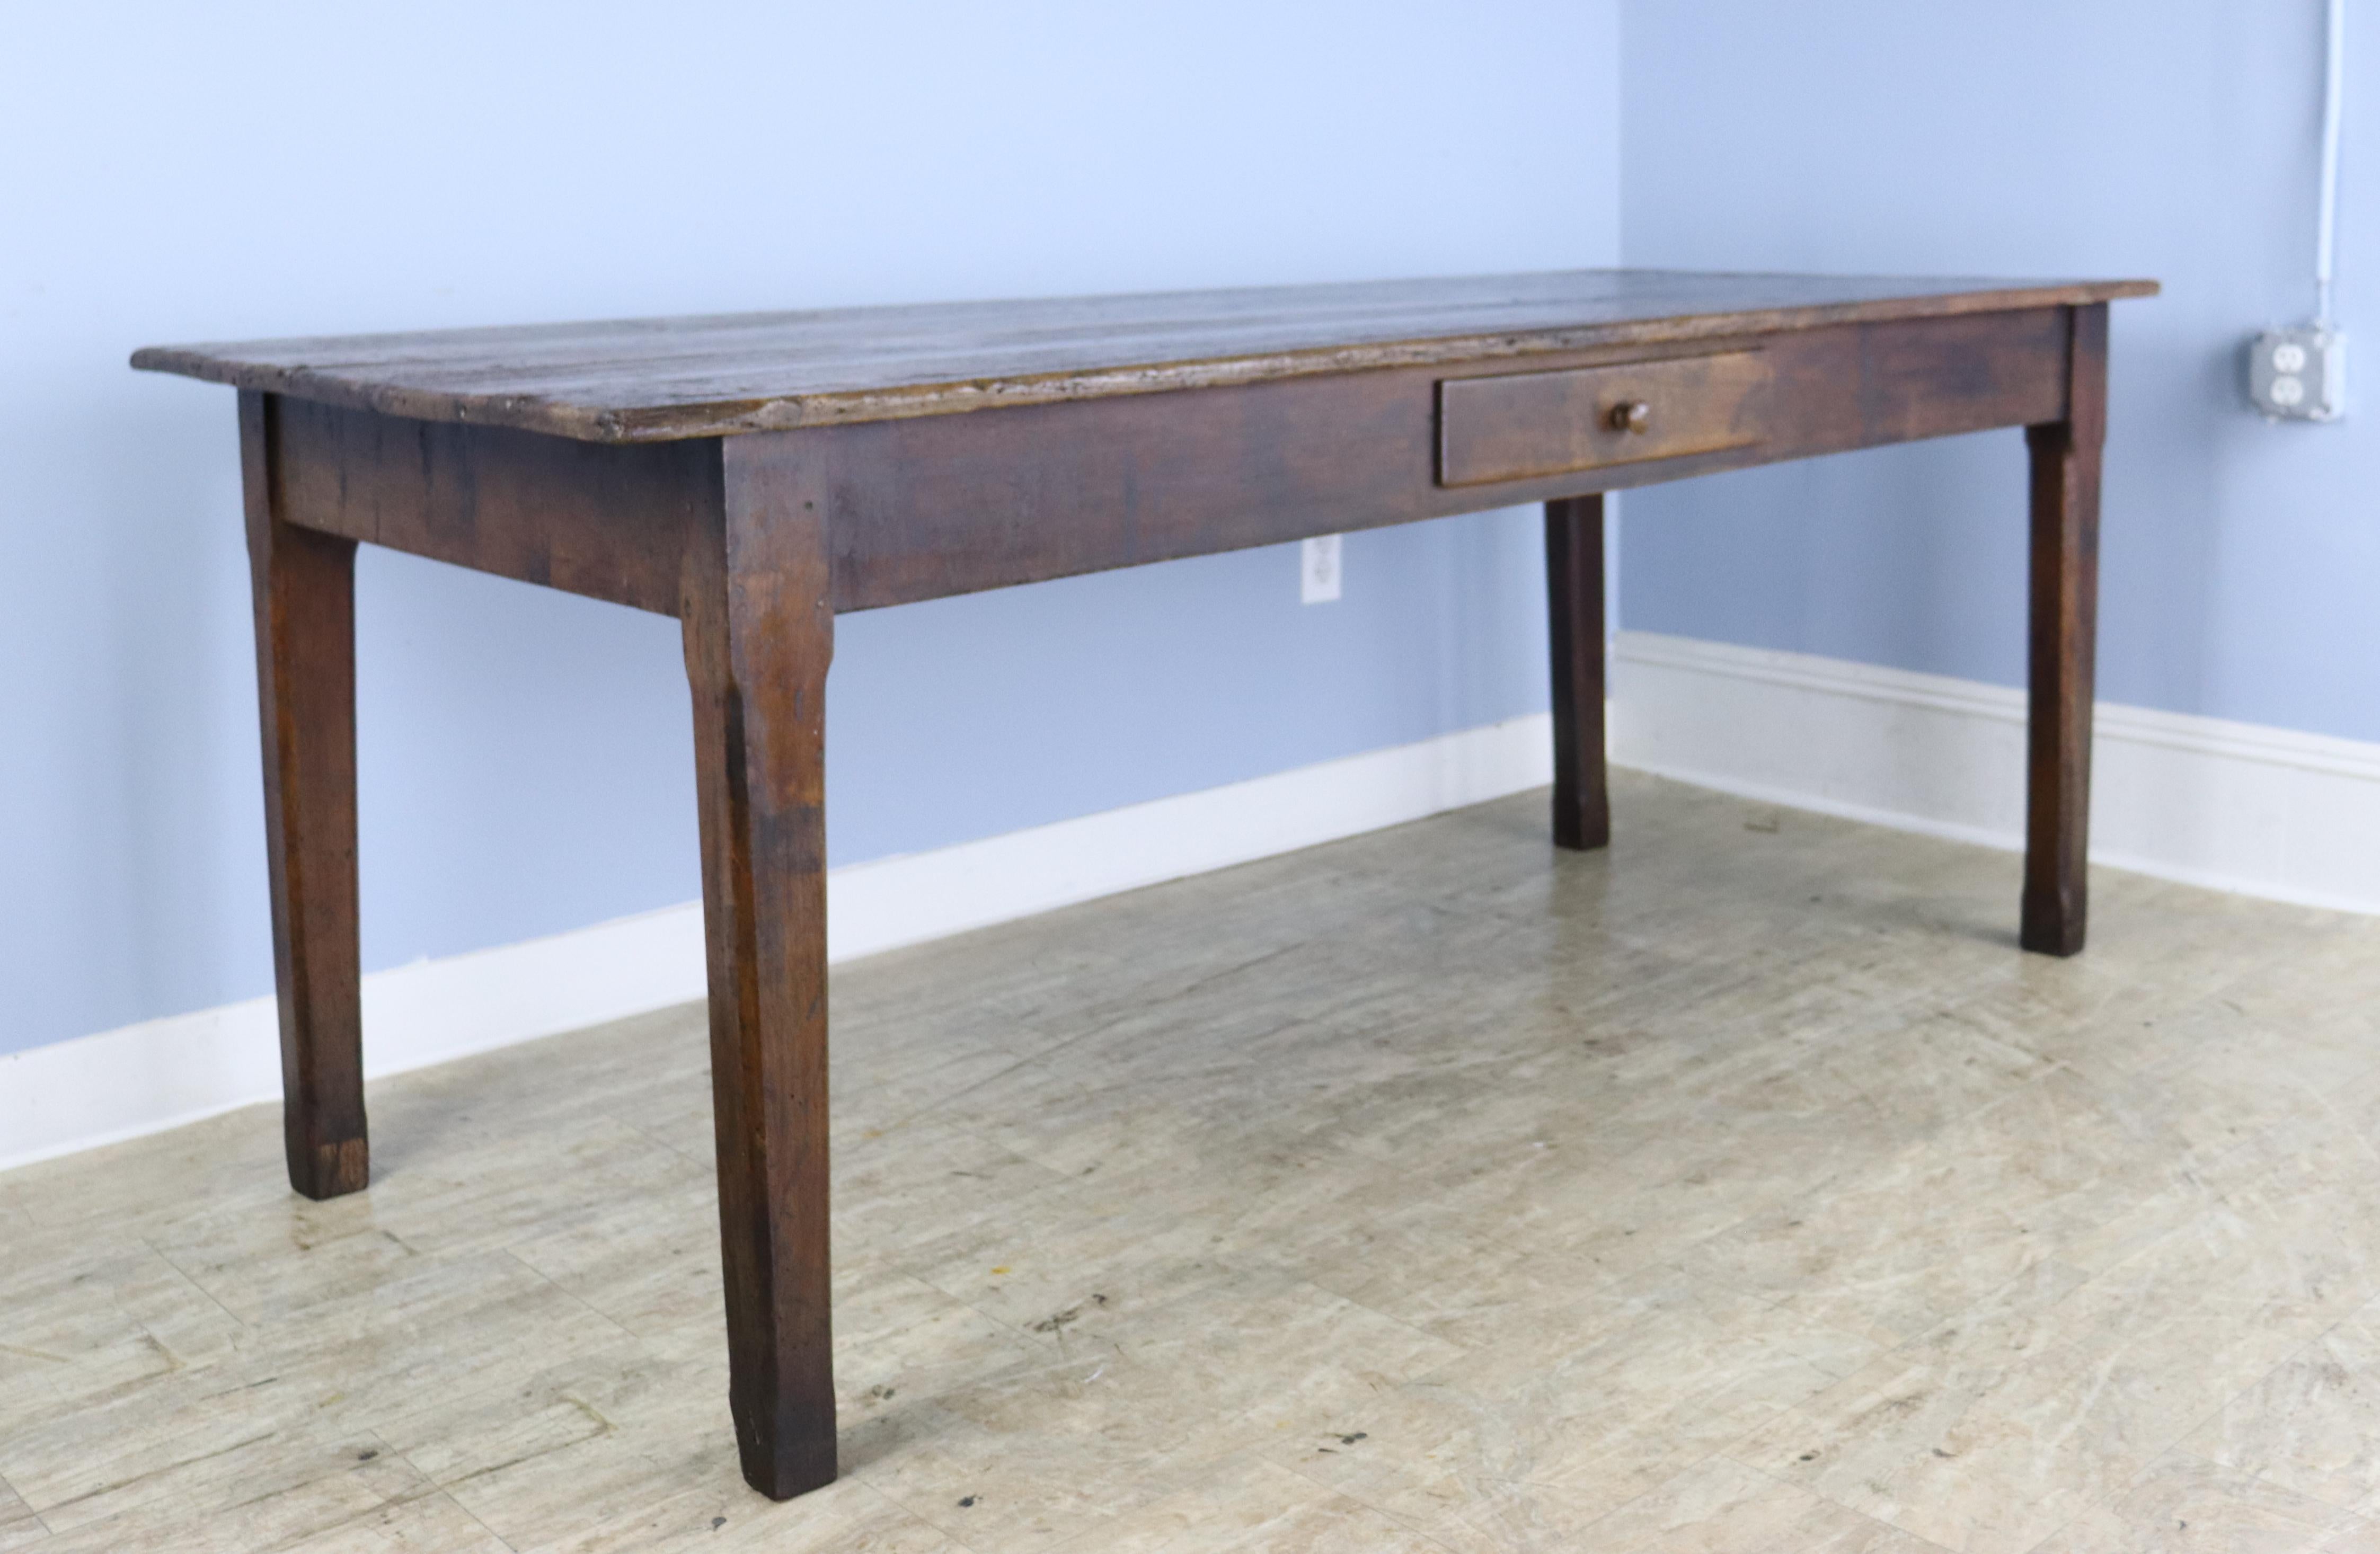 A handsome country pine farm table from France with very good color and patina.  Classic tapered legs, nicely pegged at the apron.  Single useful drawer that opens and closes well.  The apron height of 24.25 inches is good for knees, and there are